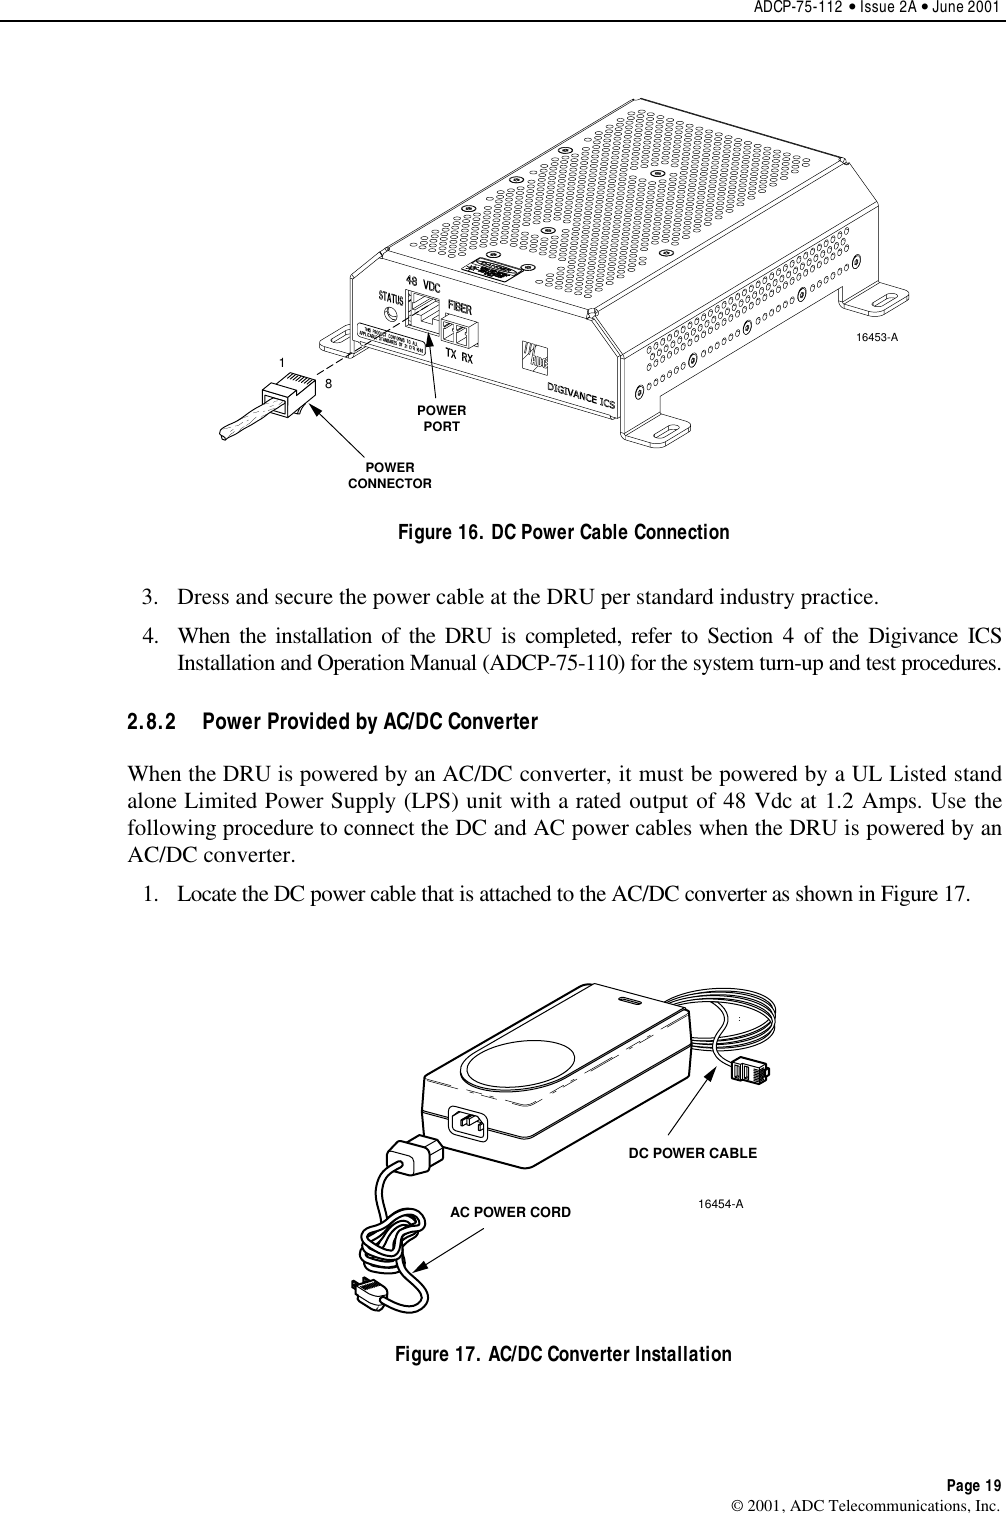 ADCP-75-112 • Issue 2A • June 2001Page 19© 2001, ADC Telecommunications, Inc.POWERPORTPOWERCONNECTOR16453-A18Figure 16. DC Power Cable Connection3. Dress and secure the power cable at the DRU per standard industry practice.4. When the installation of the DRU is completed, refer to Section 4of the Digivance ICSInstallation and Operation Manual (ADCP-75-110) for the system turn-up and test procedures.2.8.2  Power Provided by AC/DC ConverterWhen the DRU is powered by an AC/DC converter, it must be powered by a UL Listed standalone Limited Power Supply (LPS) unit with arated output of 48 Vdc at 1.2 Amps. Use thefollowing procedure to connect the DC and AC power cables when the DRU is powered by anAC/DC converter.1. Locate the DC power cable that is attached to the AC/DC converter as shown in Figure 17.DC POWER CABLEAC POWER CORD16454-AFigure 17. AC/DC Converter Installation